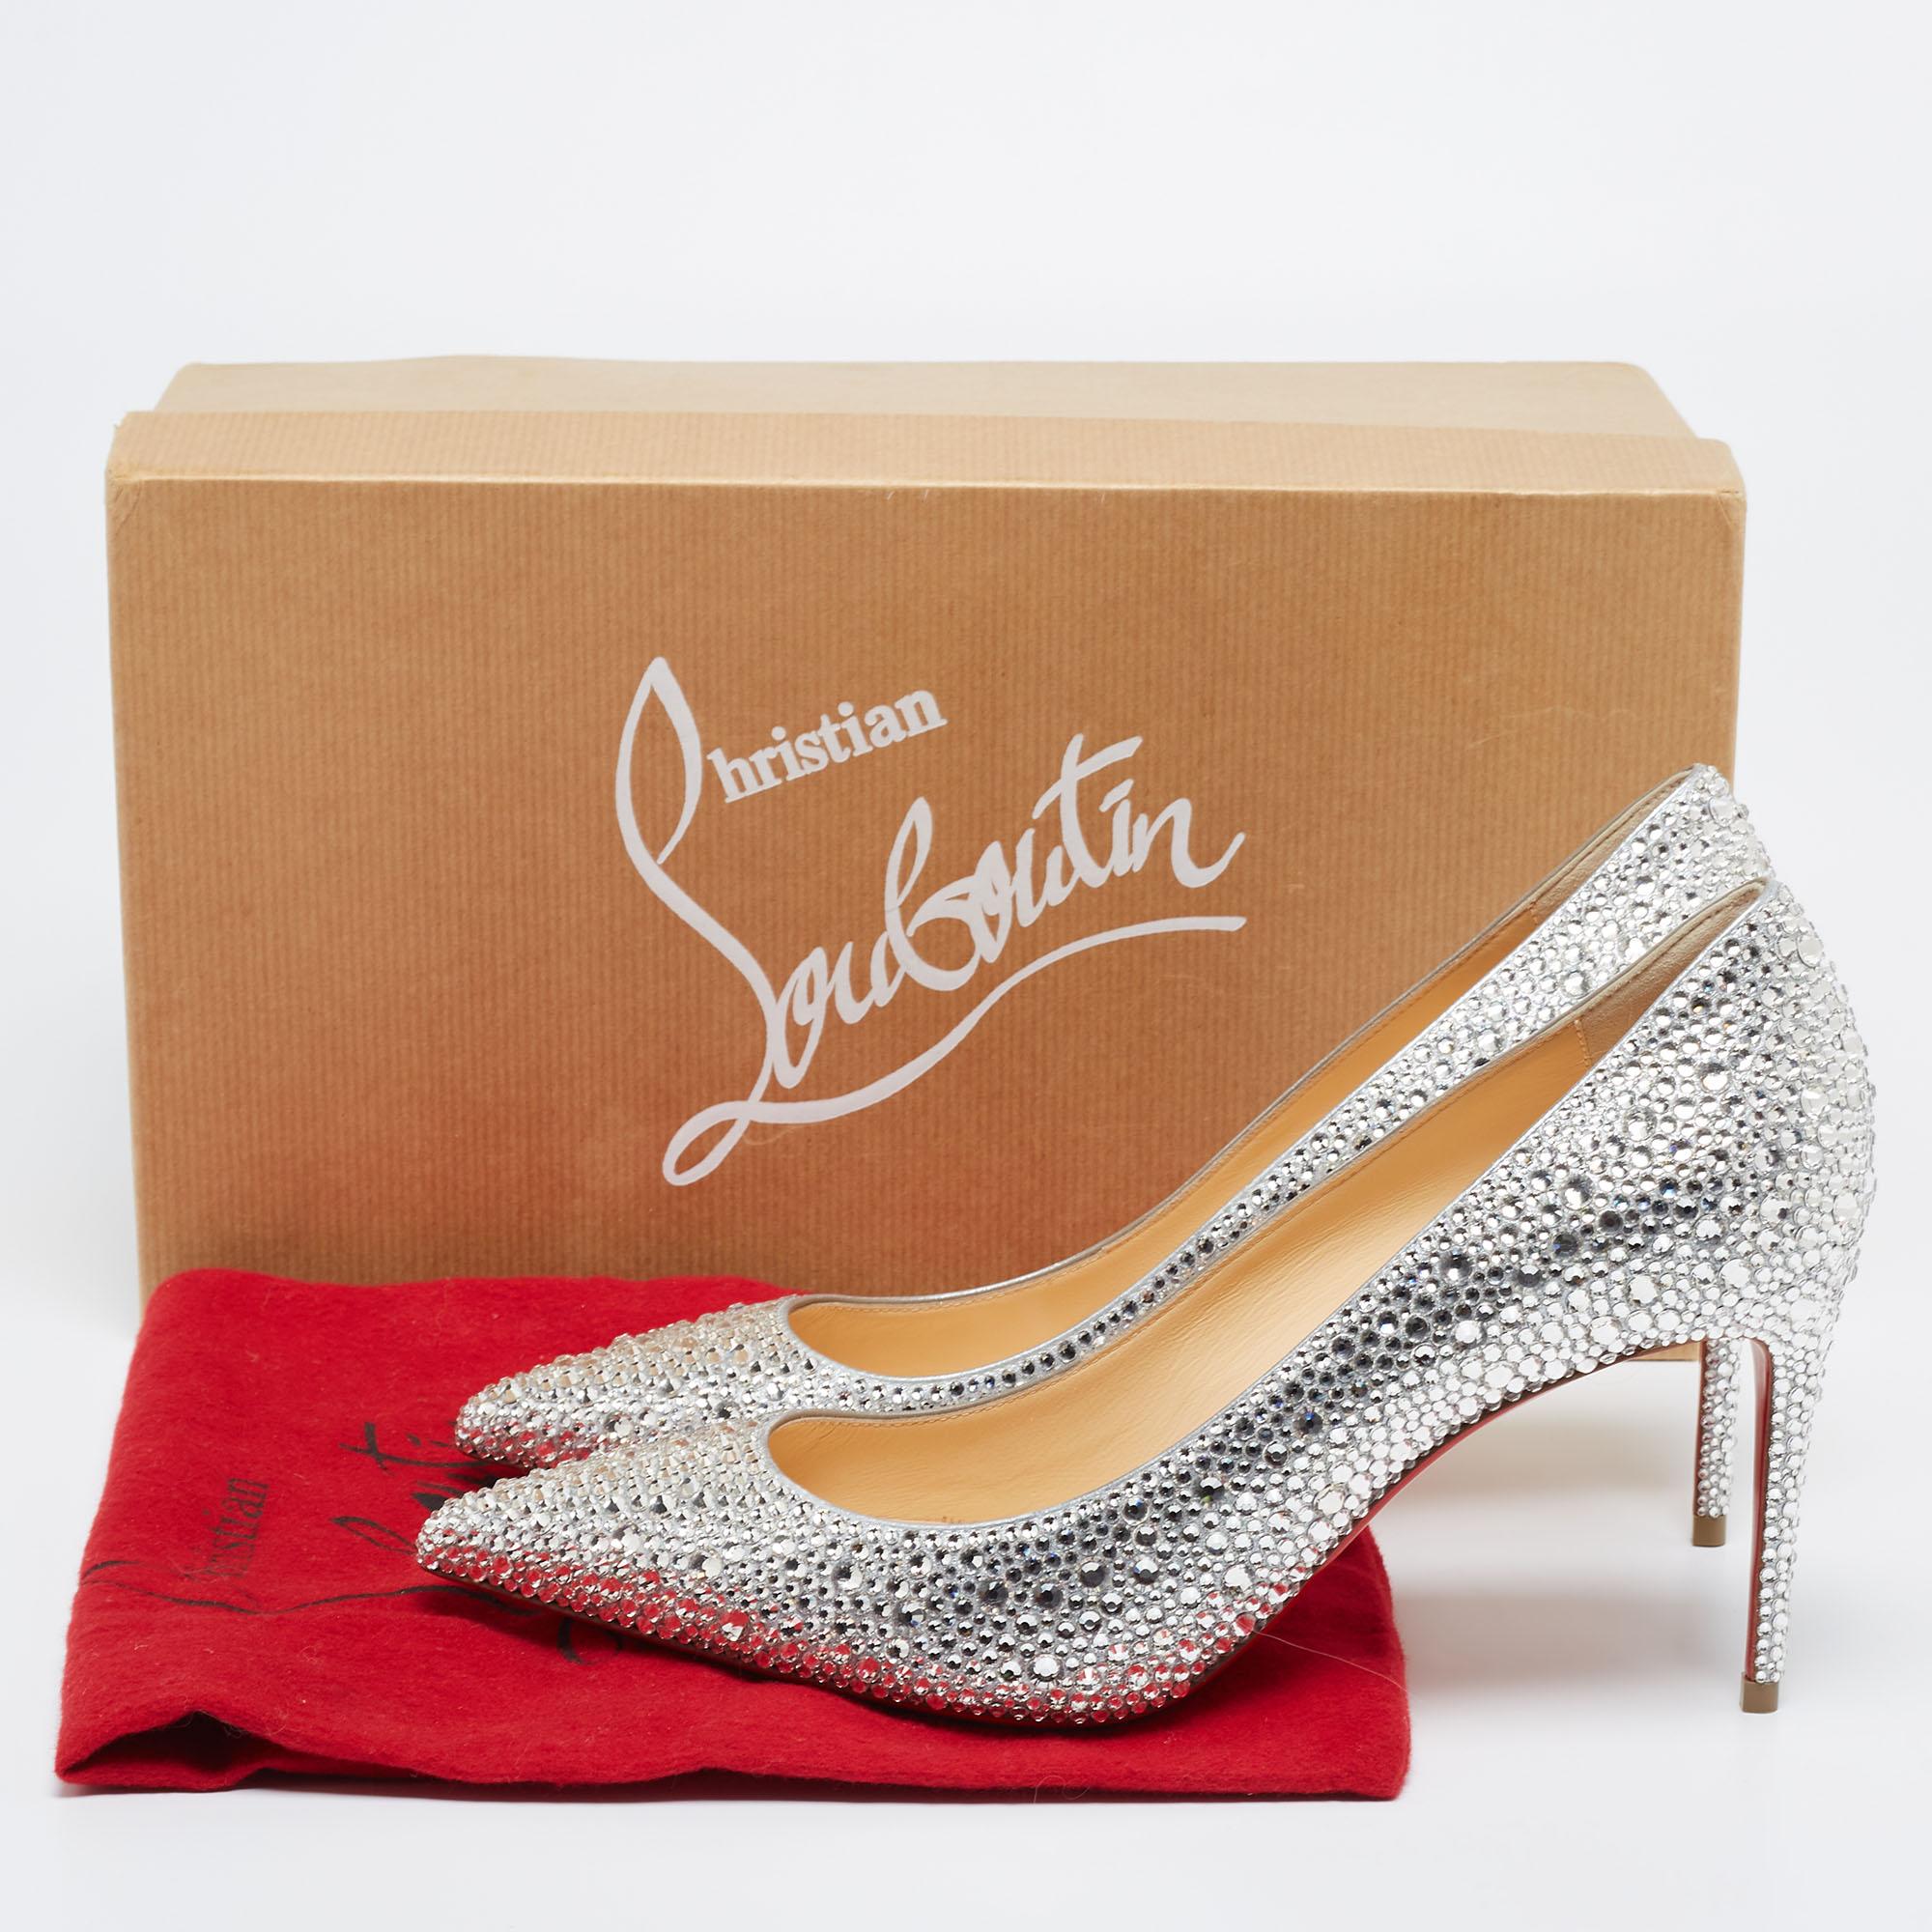 Christian Louboutin Silver Strass Leather Kate Pumps Size 38 3